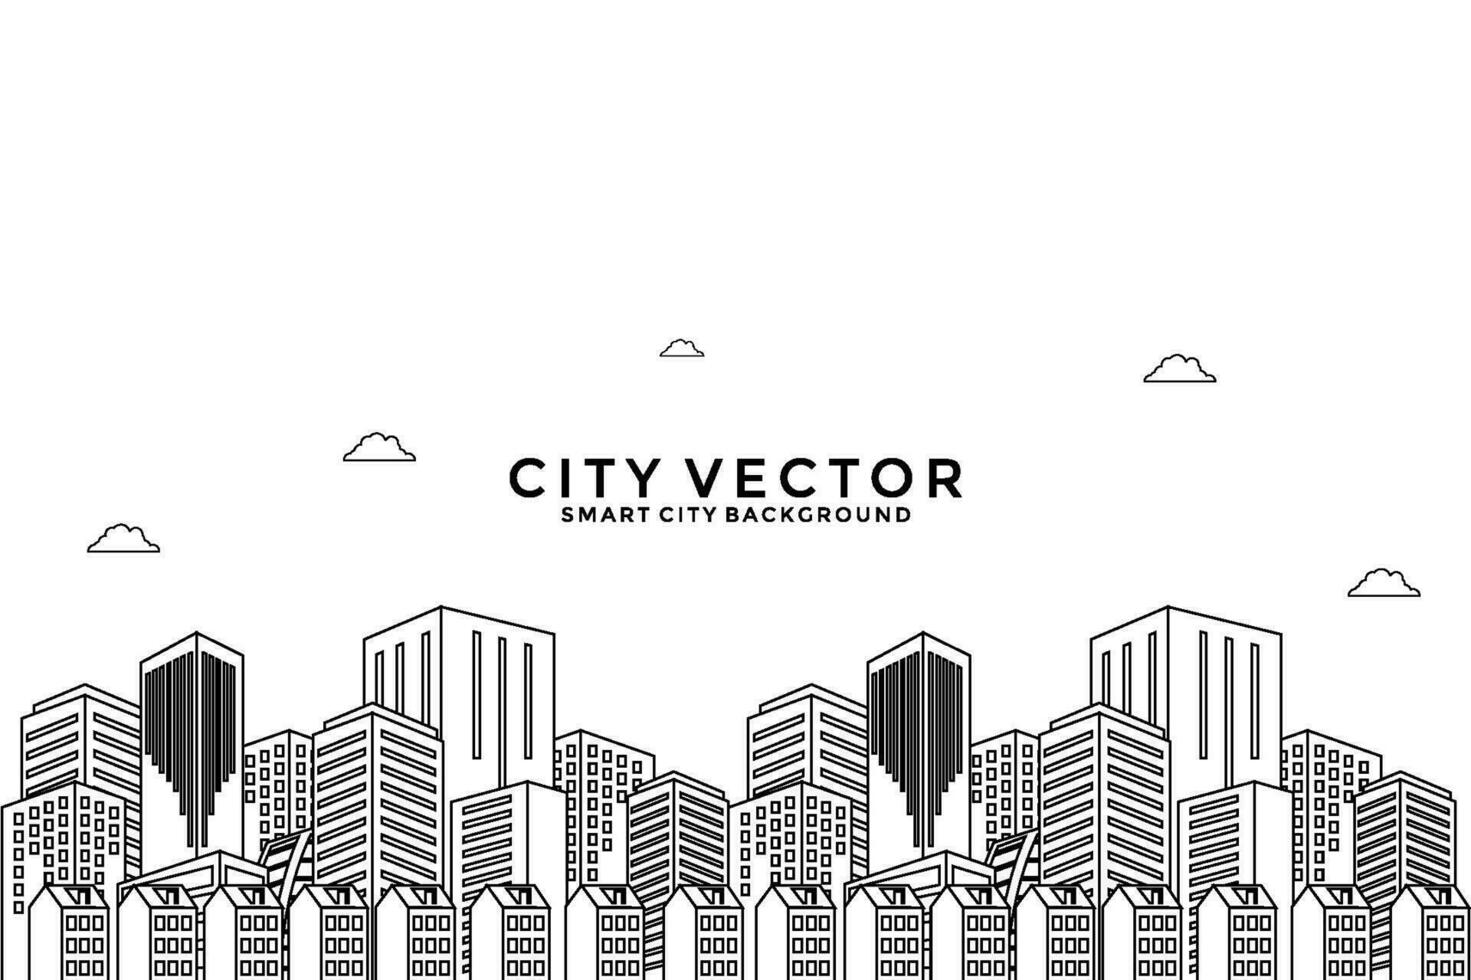 City skyline vector illustration. Urban landscape. Modern cityscape in flat style, Cities Vector Background